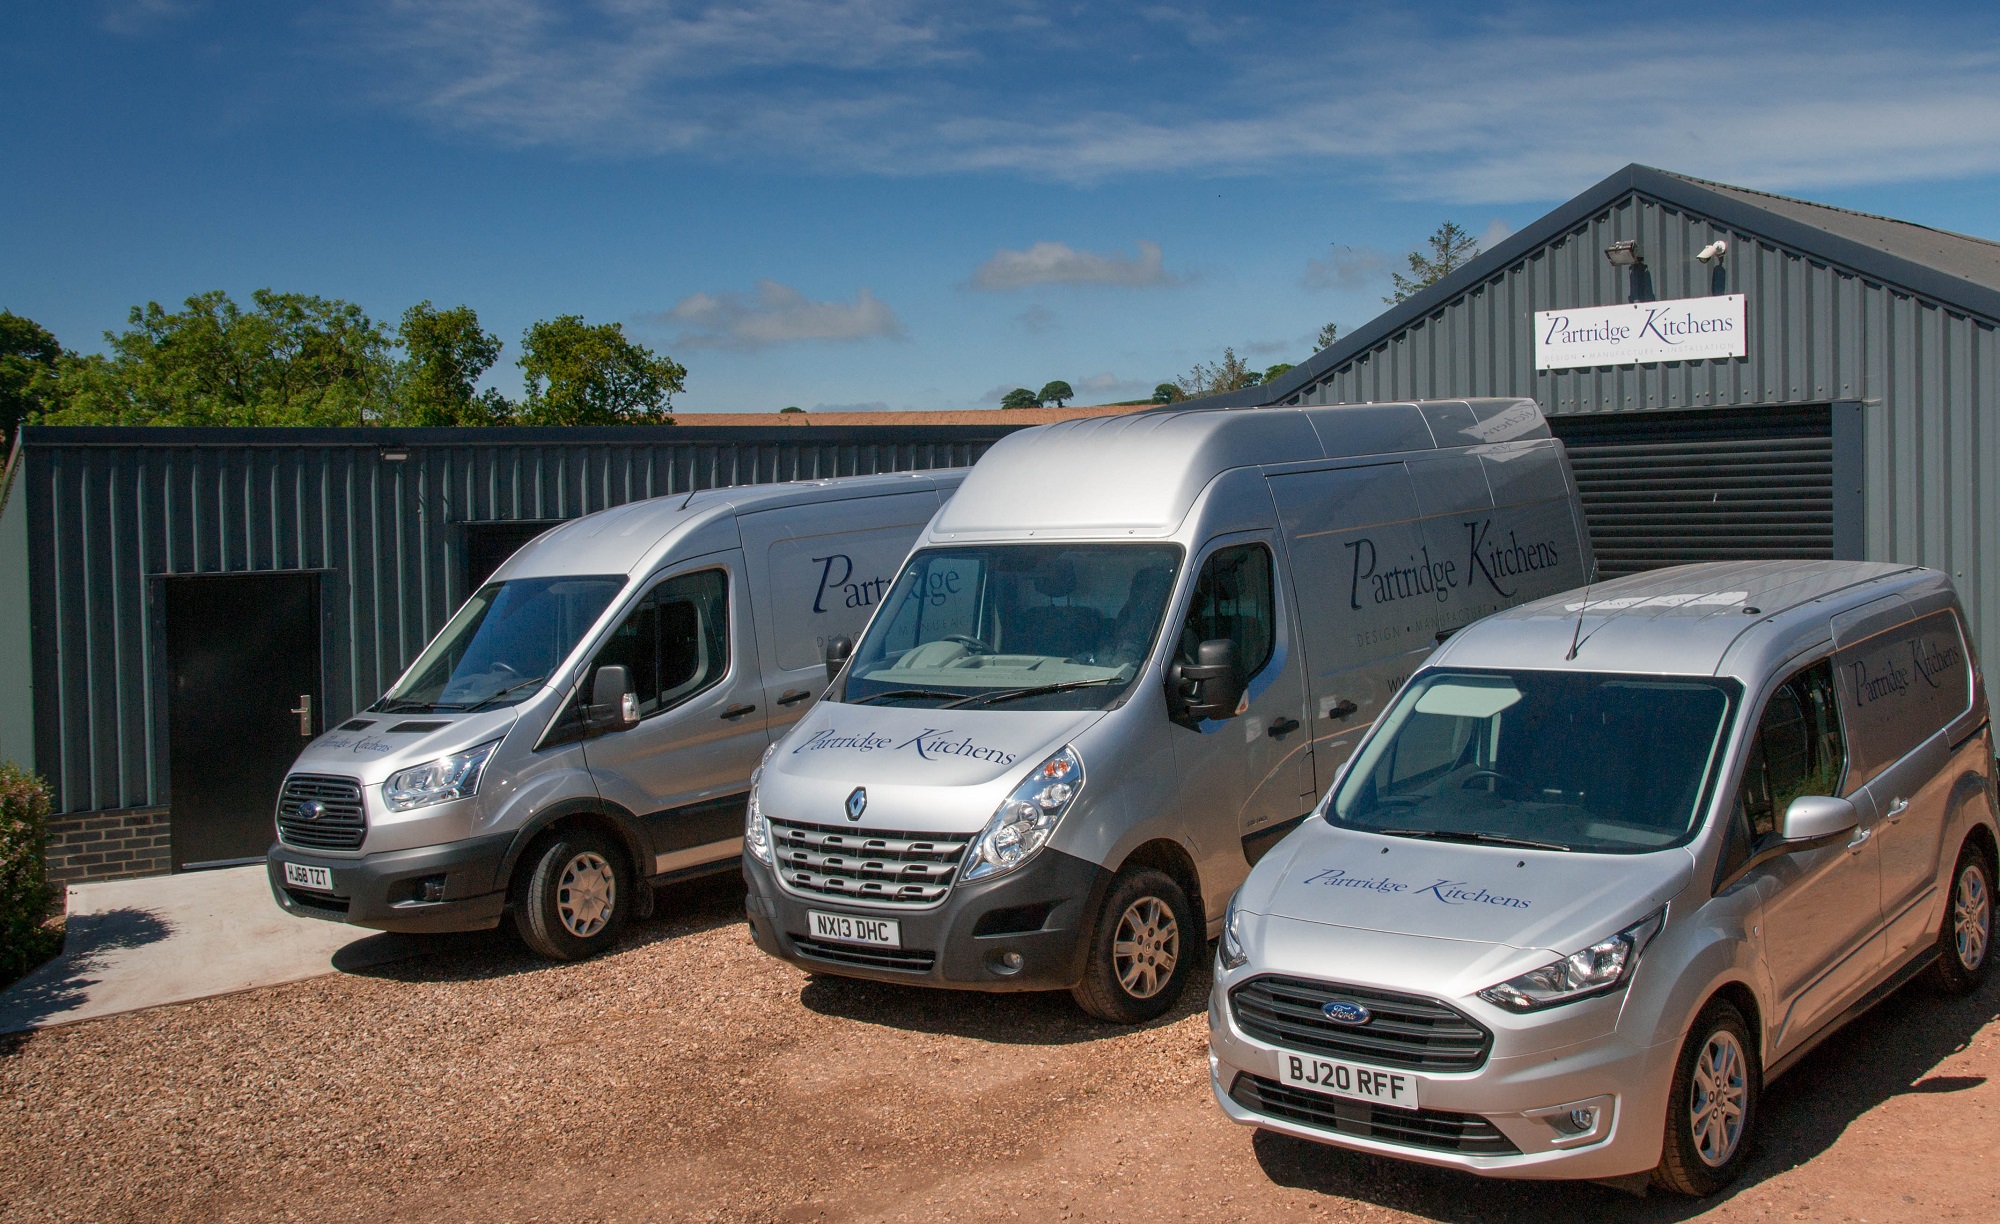 Our three vans outside the Partridge Kitchens workshop